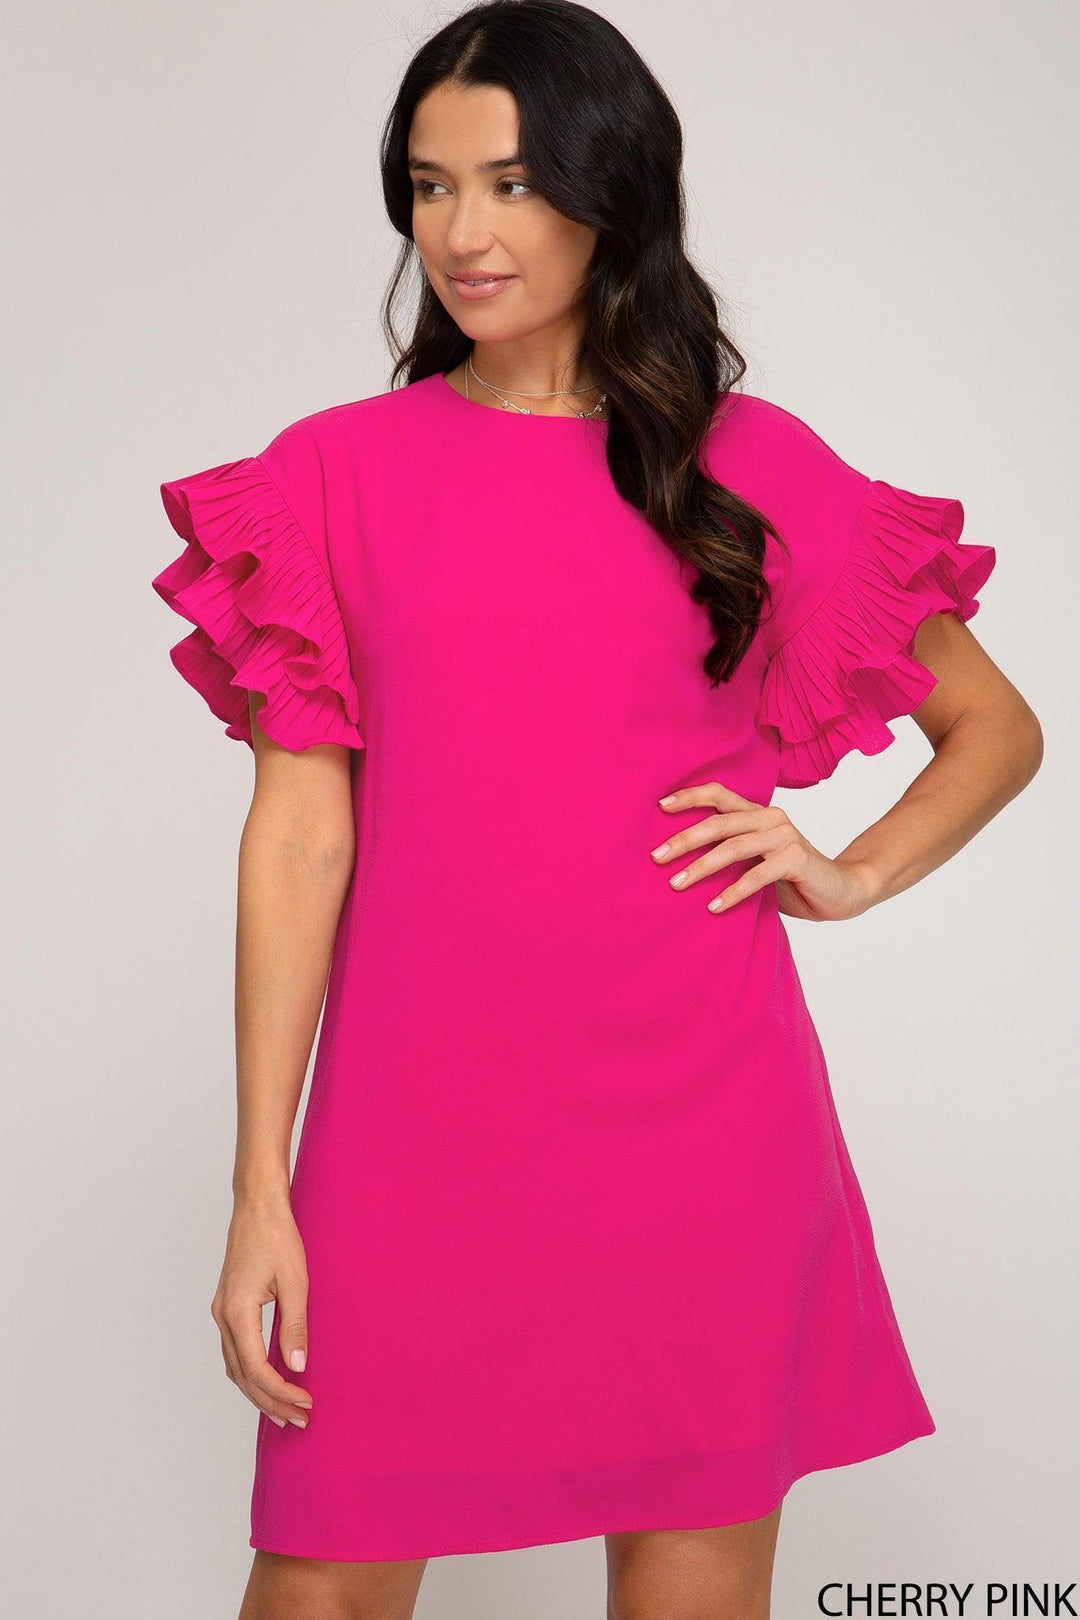 Pleat Detailed Dress in Cherry Pink - Tres Chic Houston